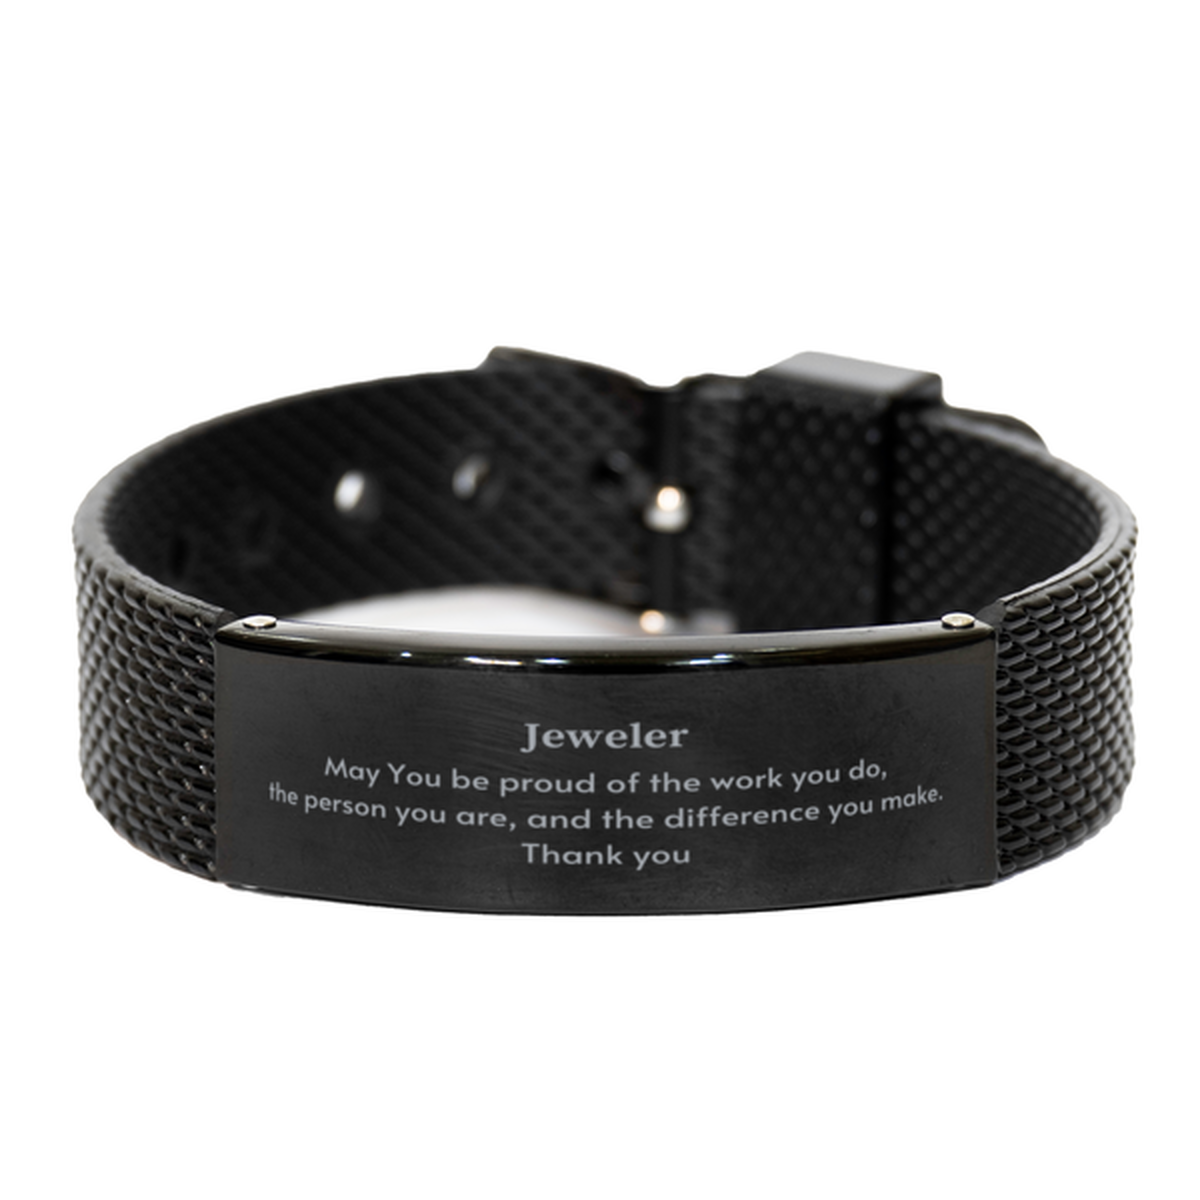 Heartwarming Black Shark Mesh Bracelet Retirement Coworkers Gifts for Jeweler, Jeweler May You be proud of the work you do, the person you are Gifts for Boss Men Women Friends